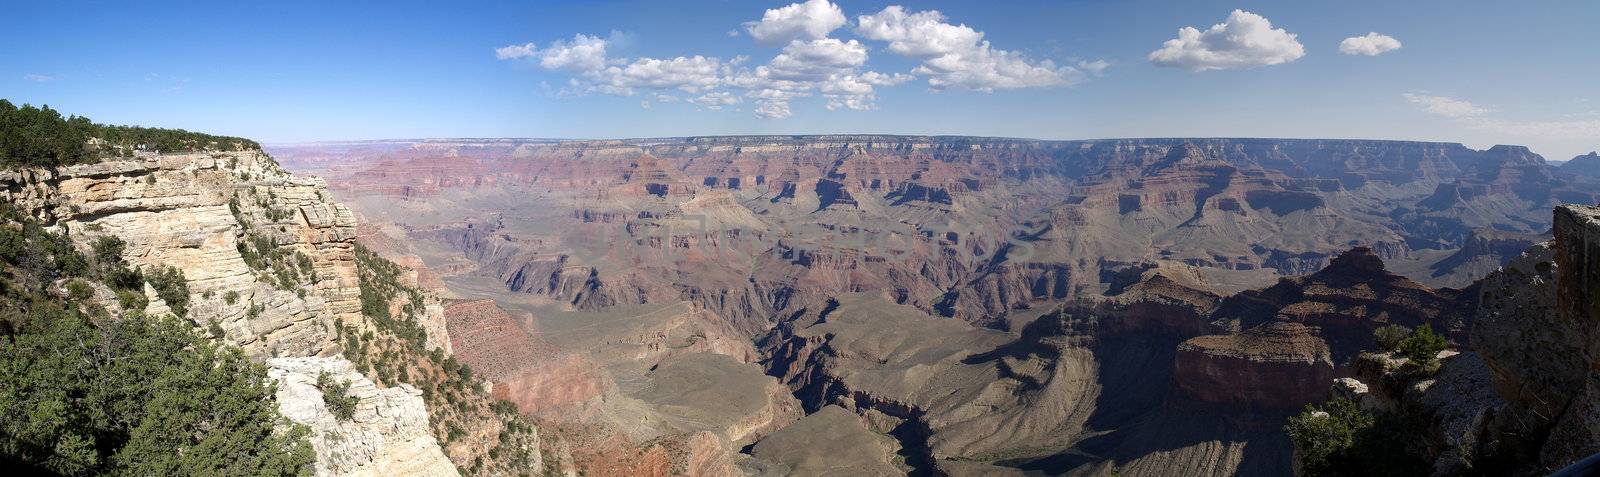 Panorama of the famous Grand Canyon